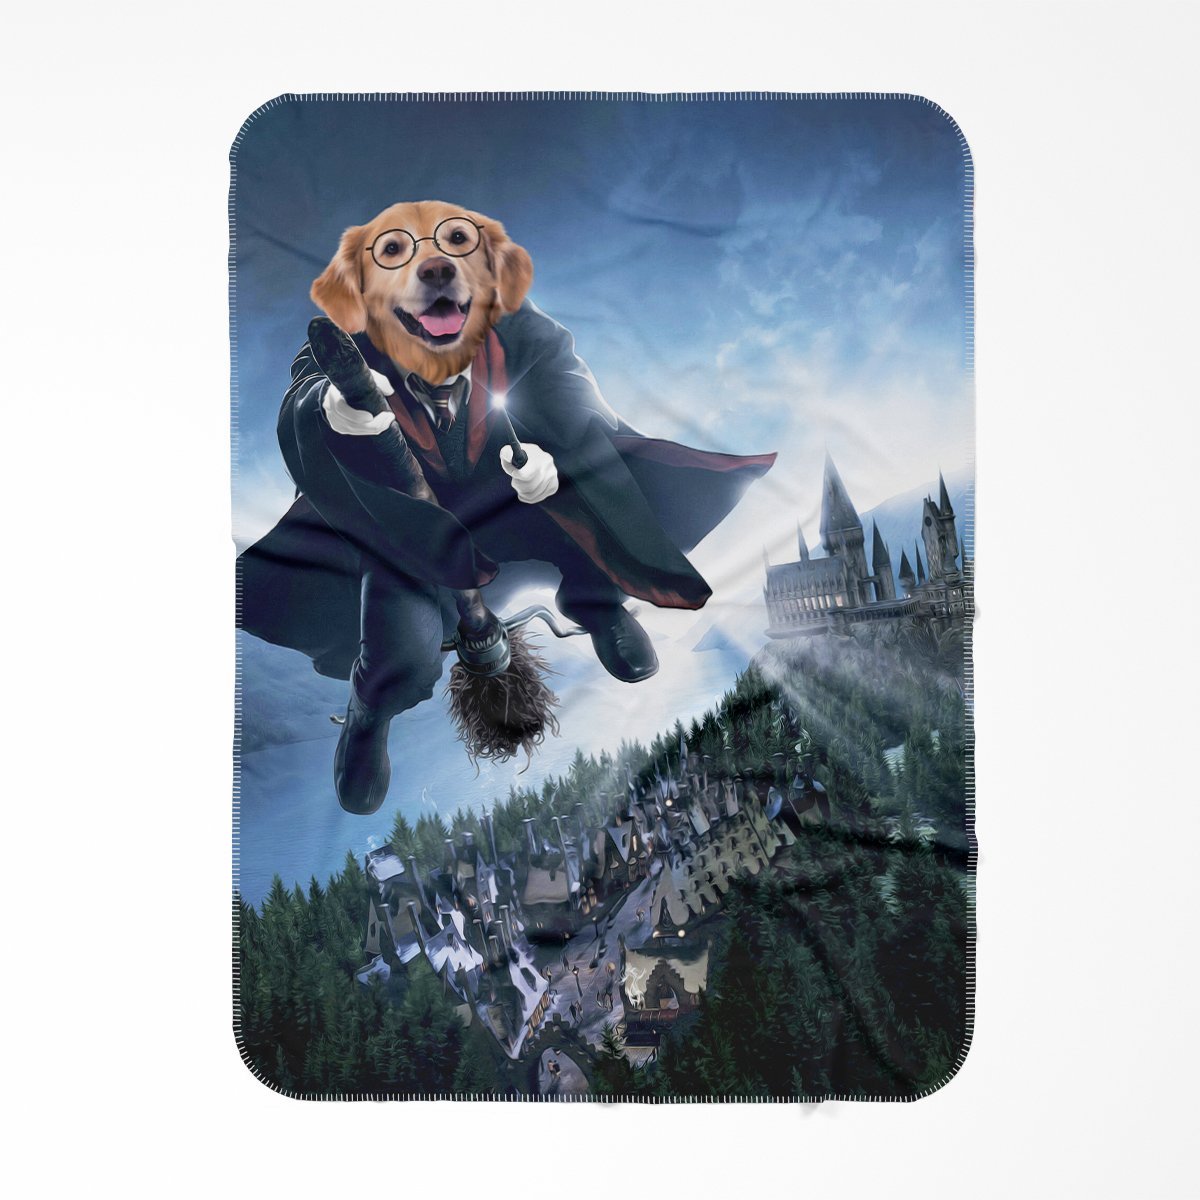 The Wizard (Harry Potter Inspired): Custom Pet Blanket - Paw & Glory - #pet portraits# - #dog portraits# - #pet portraits uk#Paw and glory, Pet portraits blanket,personalized blankets with pet pictures put your dog's face on a blanket, personalized dog picture blanket, dog image blanket, put your cat on a blanket